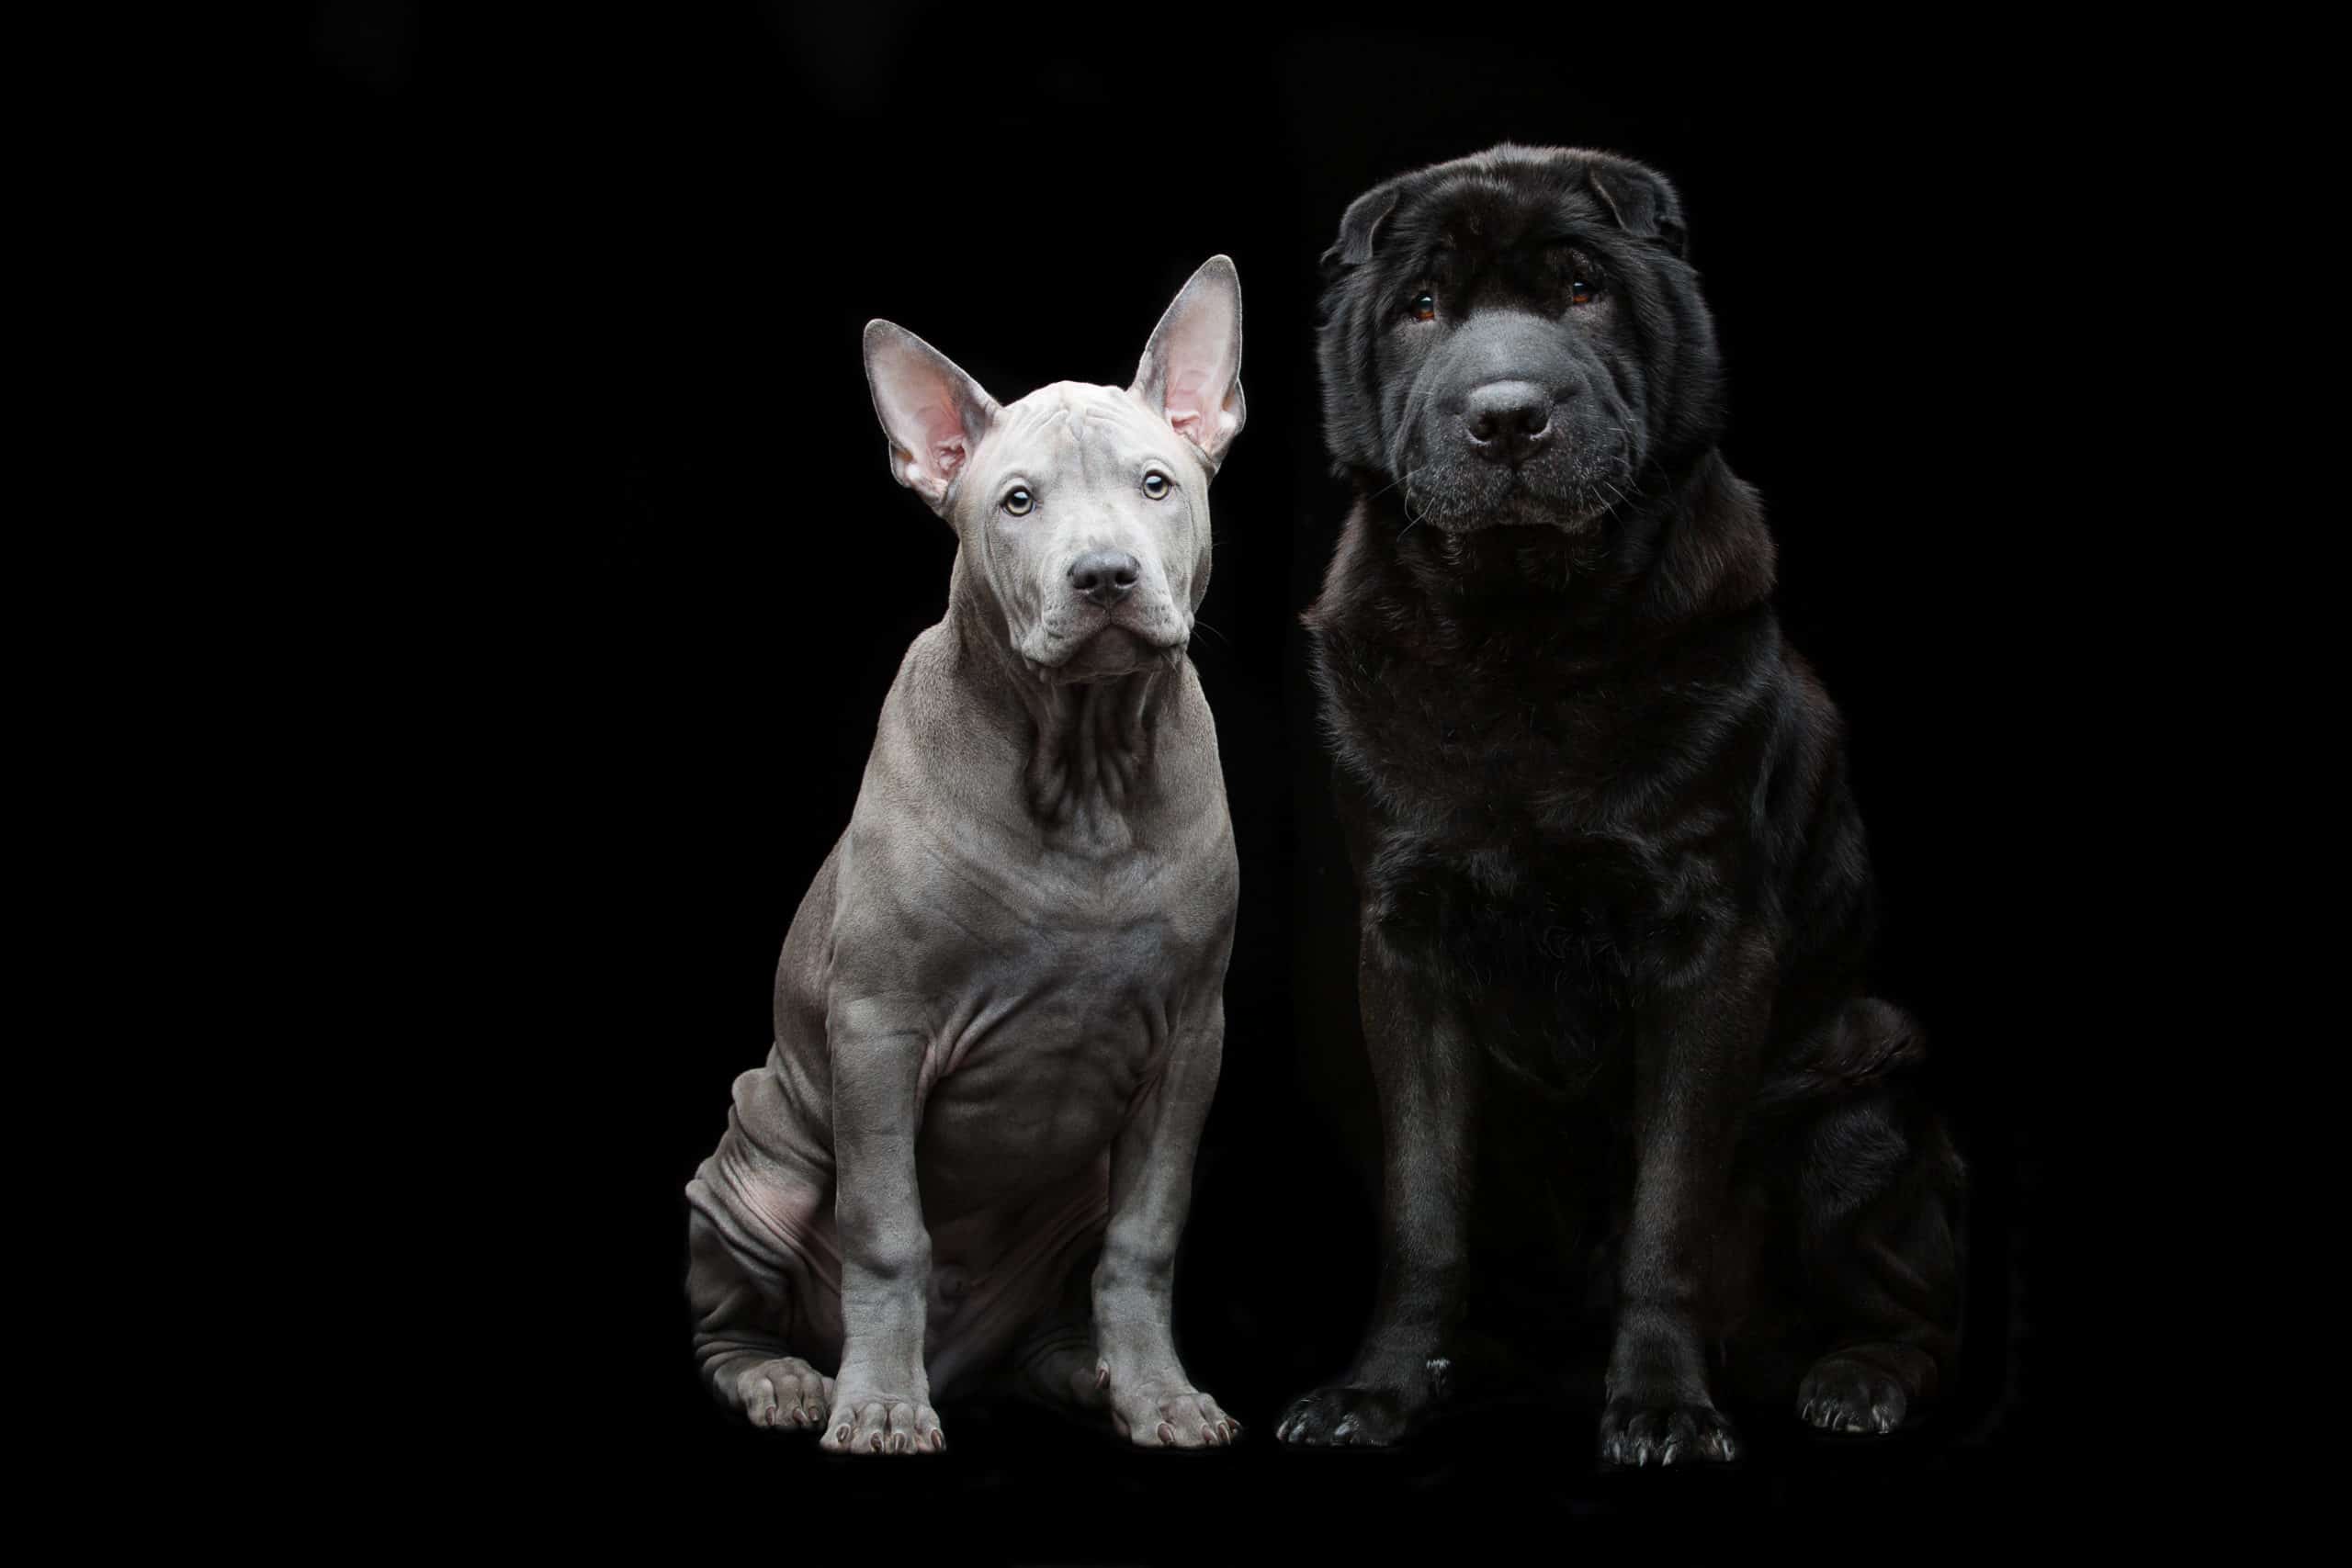 Beautiful old black purebred shar pei dog and cute blue thai ridgeback puppy sitting over black background. Copy space.